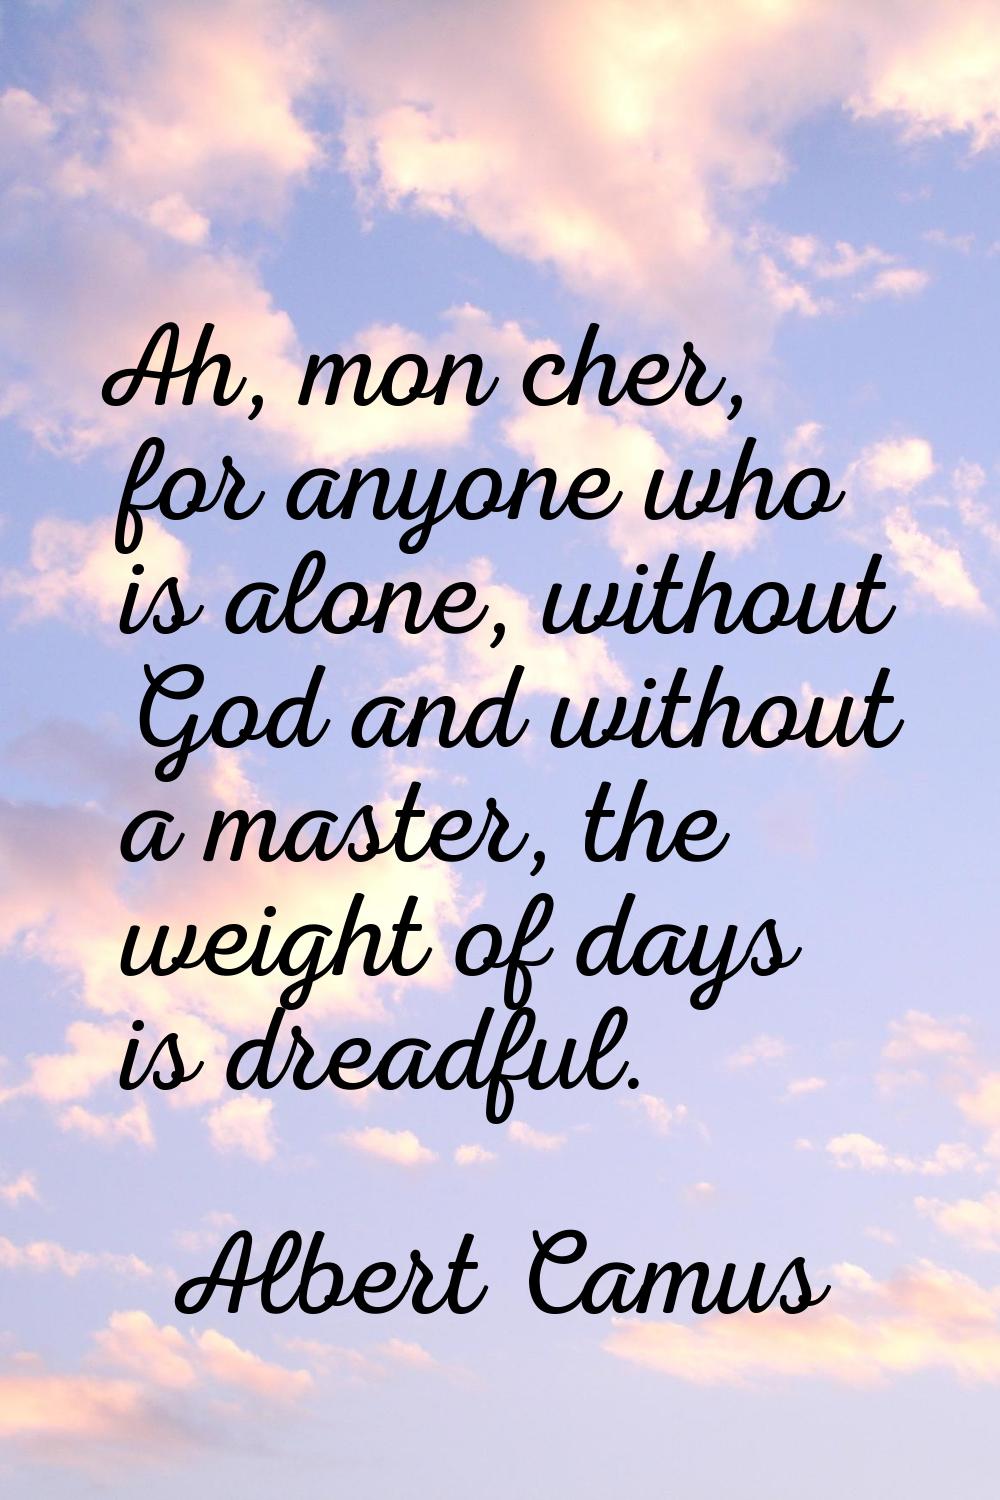 Ah, mon cher, for anyone who is alone, without God and without a master, the weight of days is drea